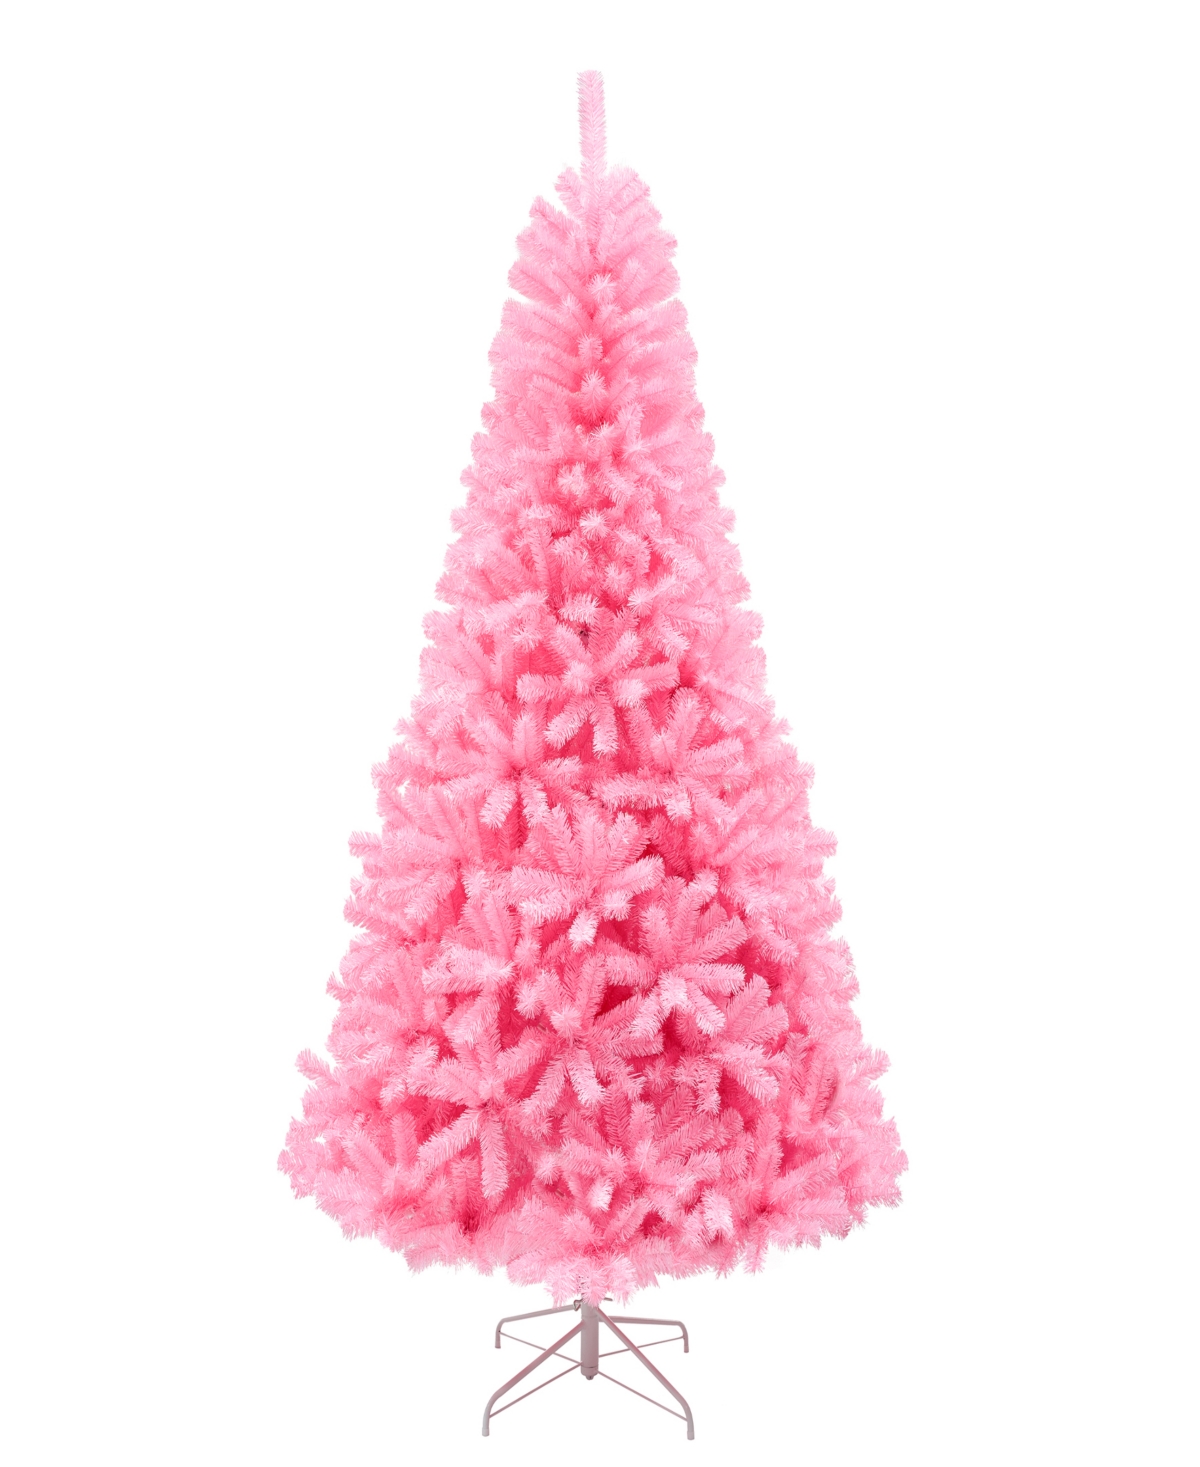 National Tree Company First Traditions 7.5' Color Pop Tree In Pink